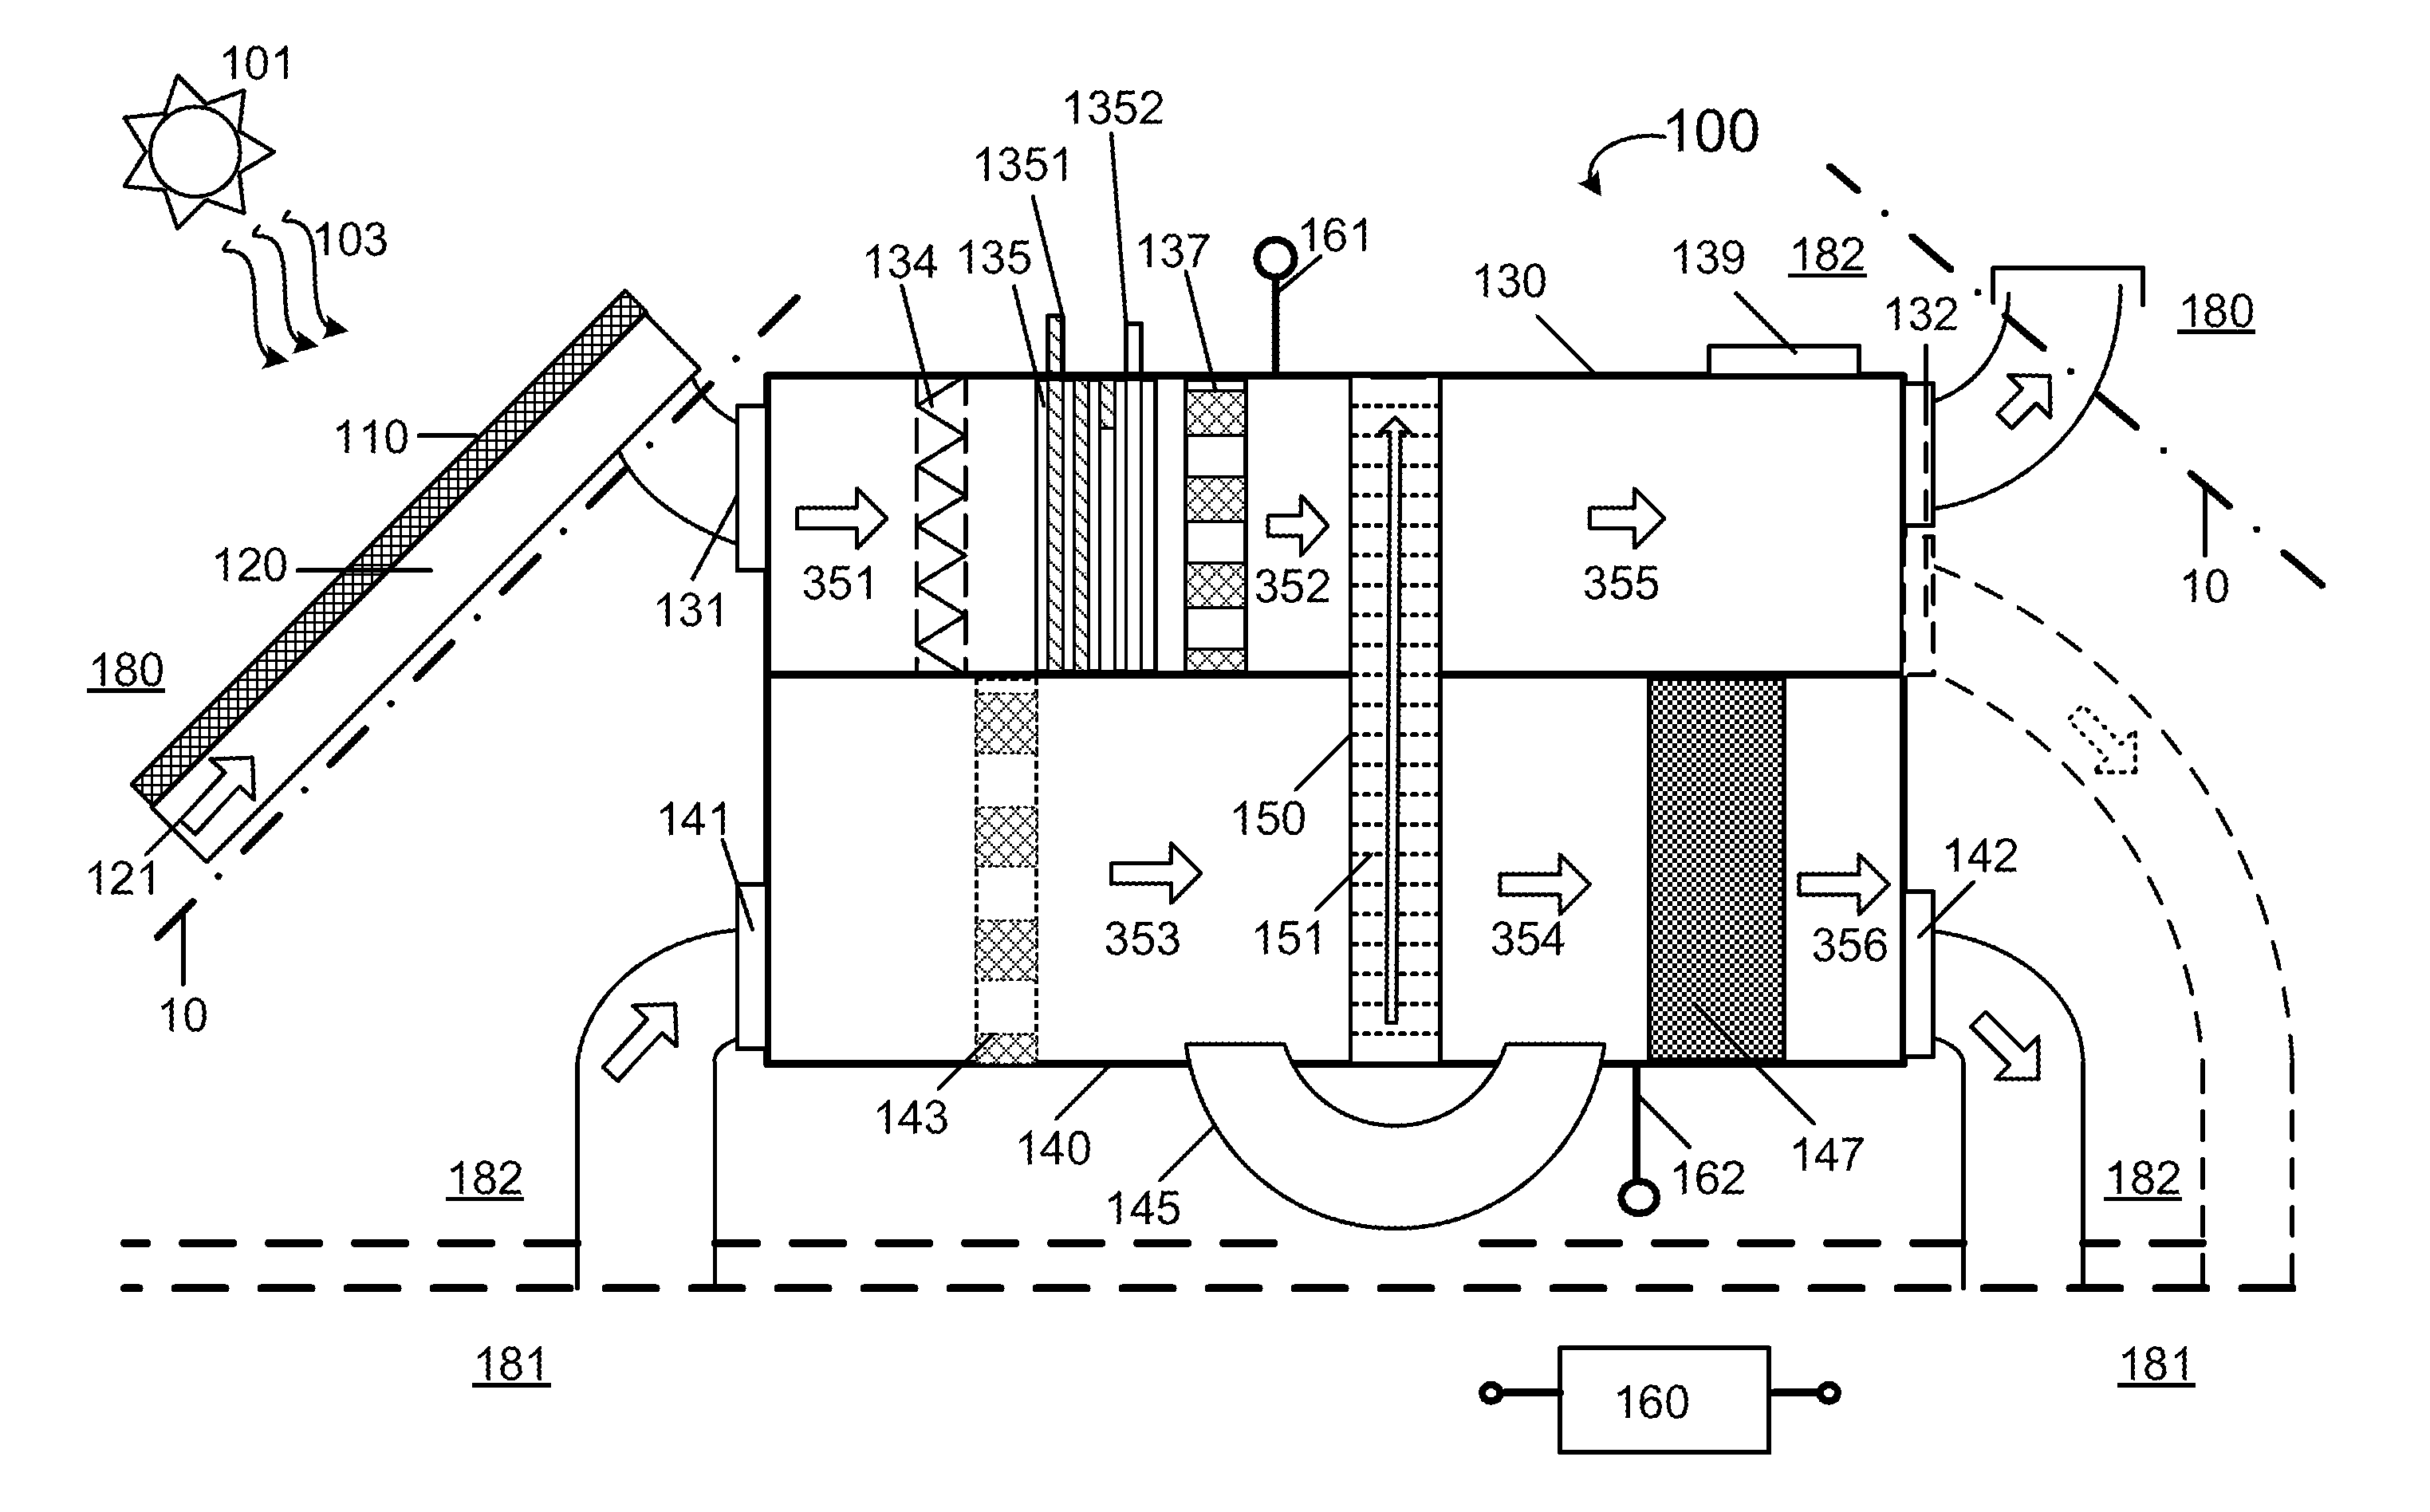 Method and system for integrated home cooling utilizing solar power